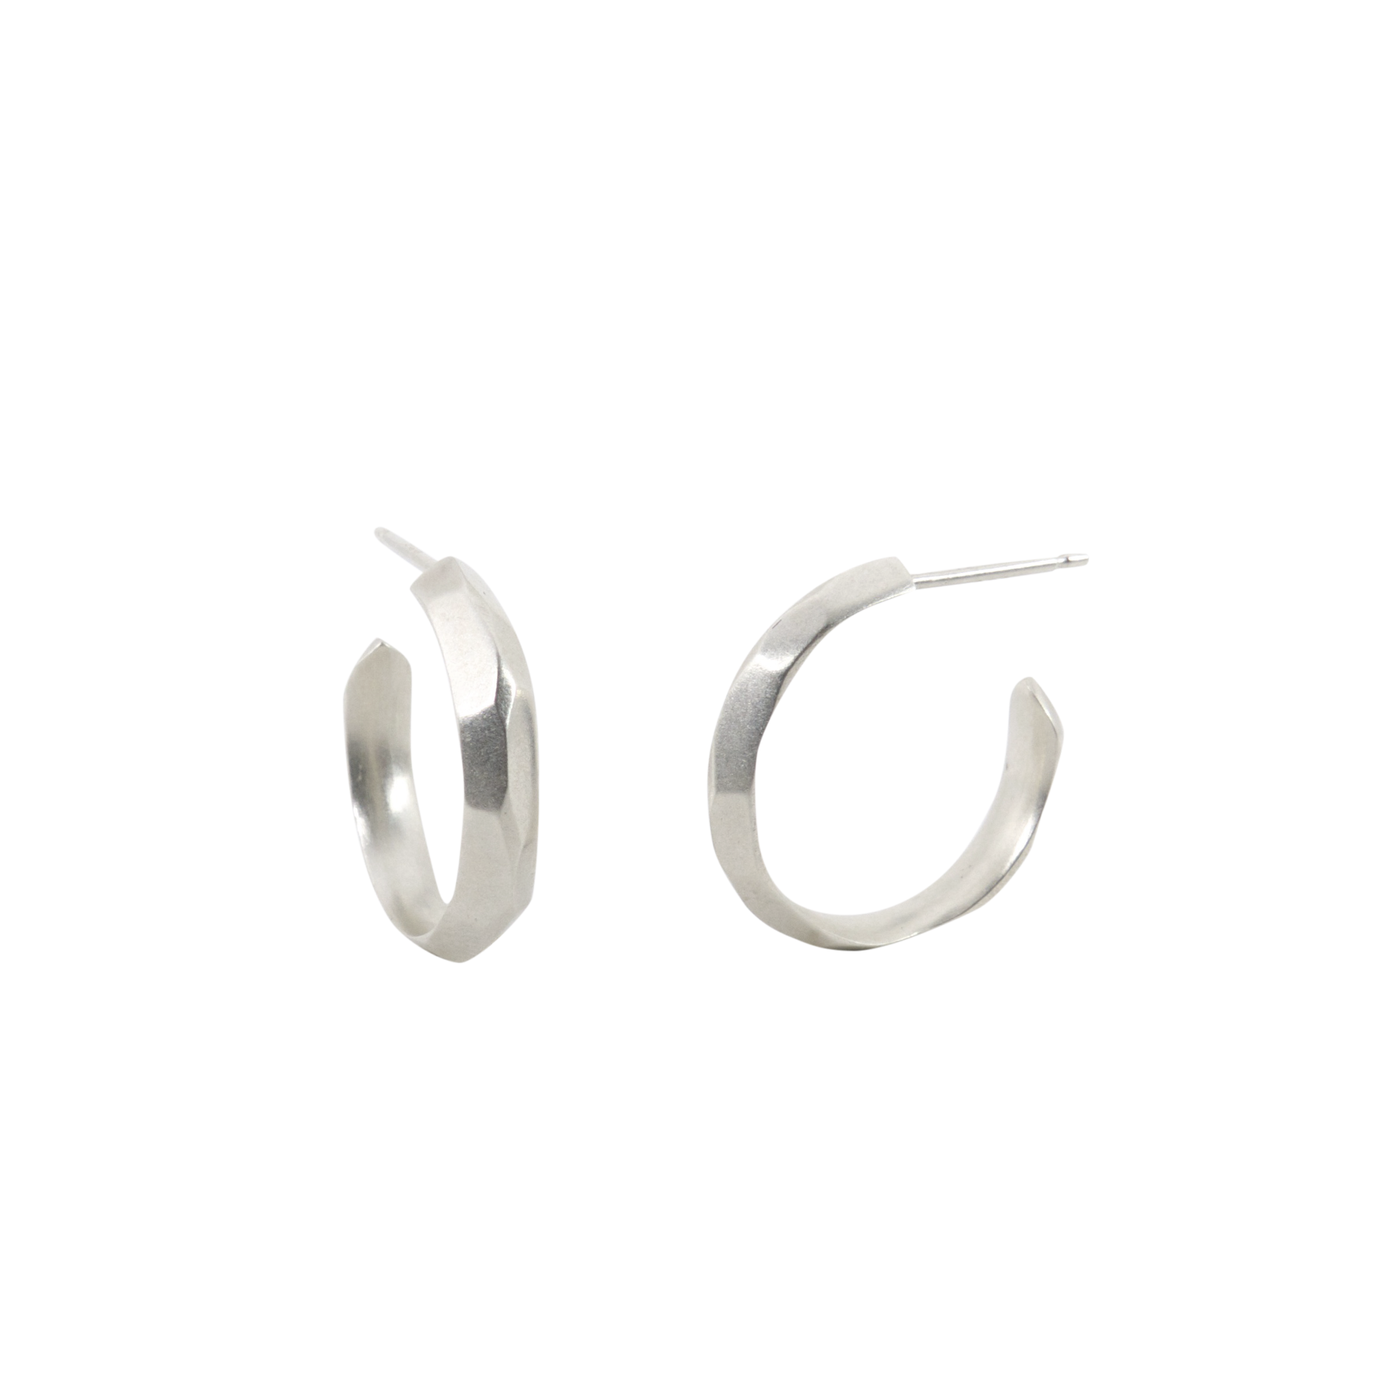 Sterling silver small faceted hoop earrings with posts by Corey Egan on a white background